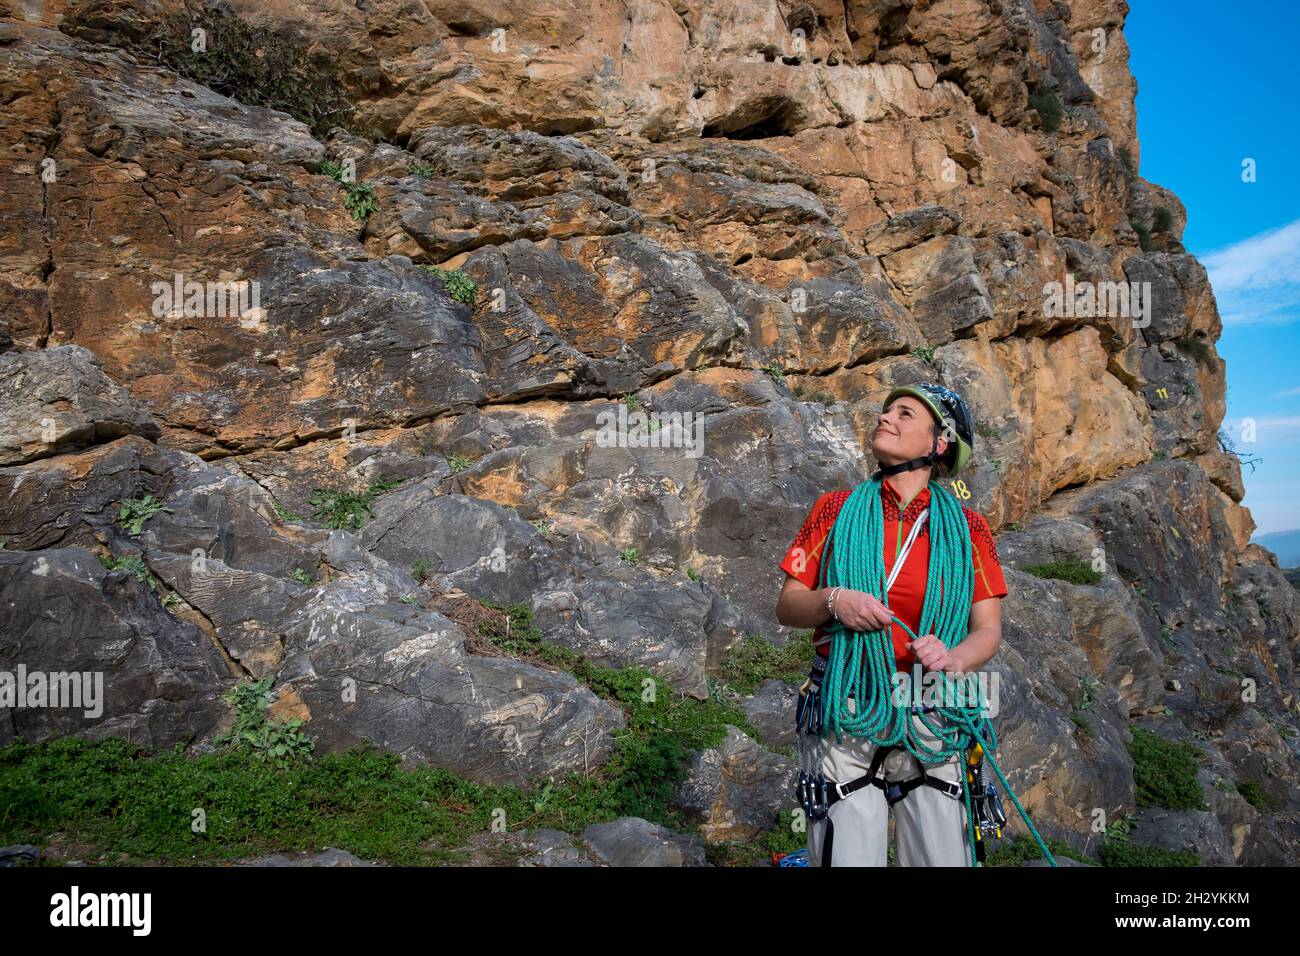 Female rock climber coiling the rope Stock Photo